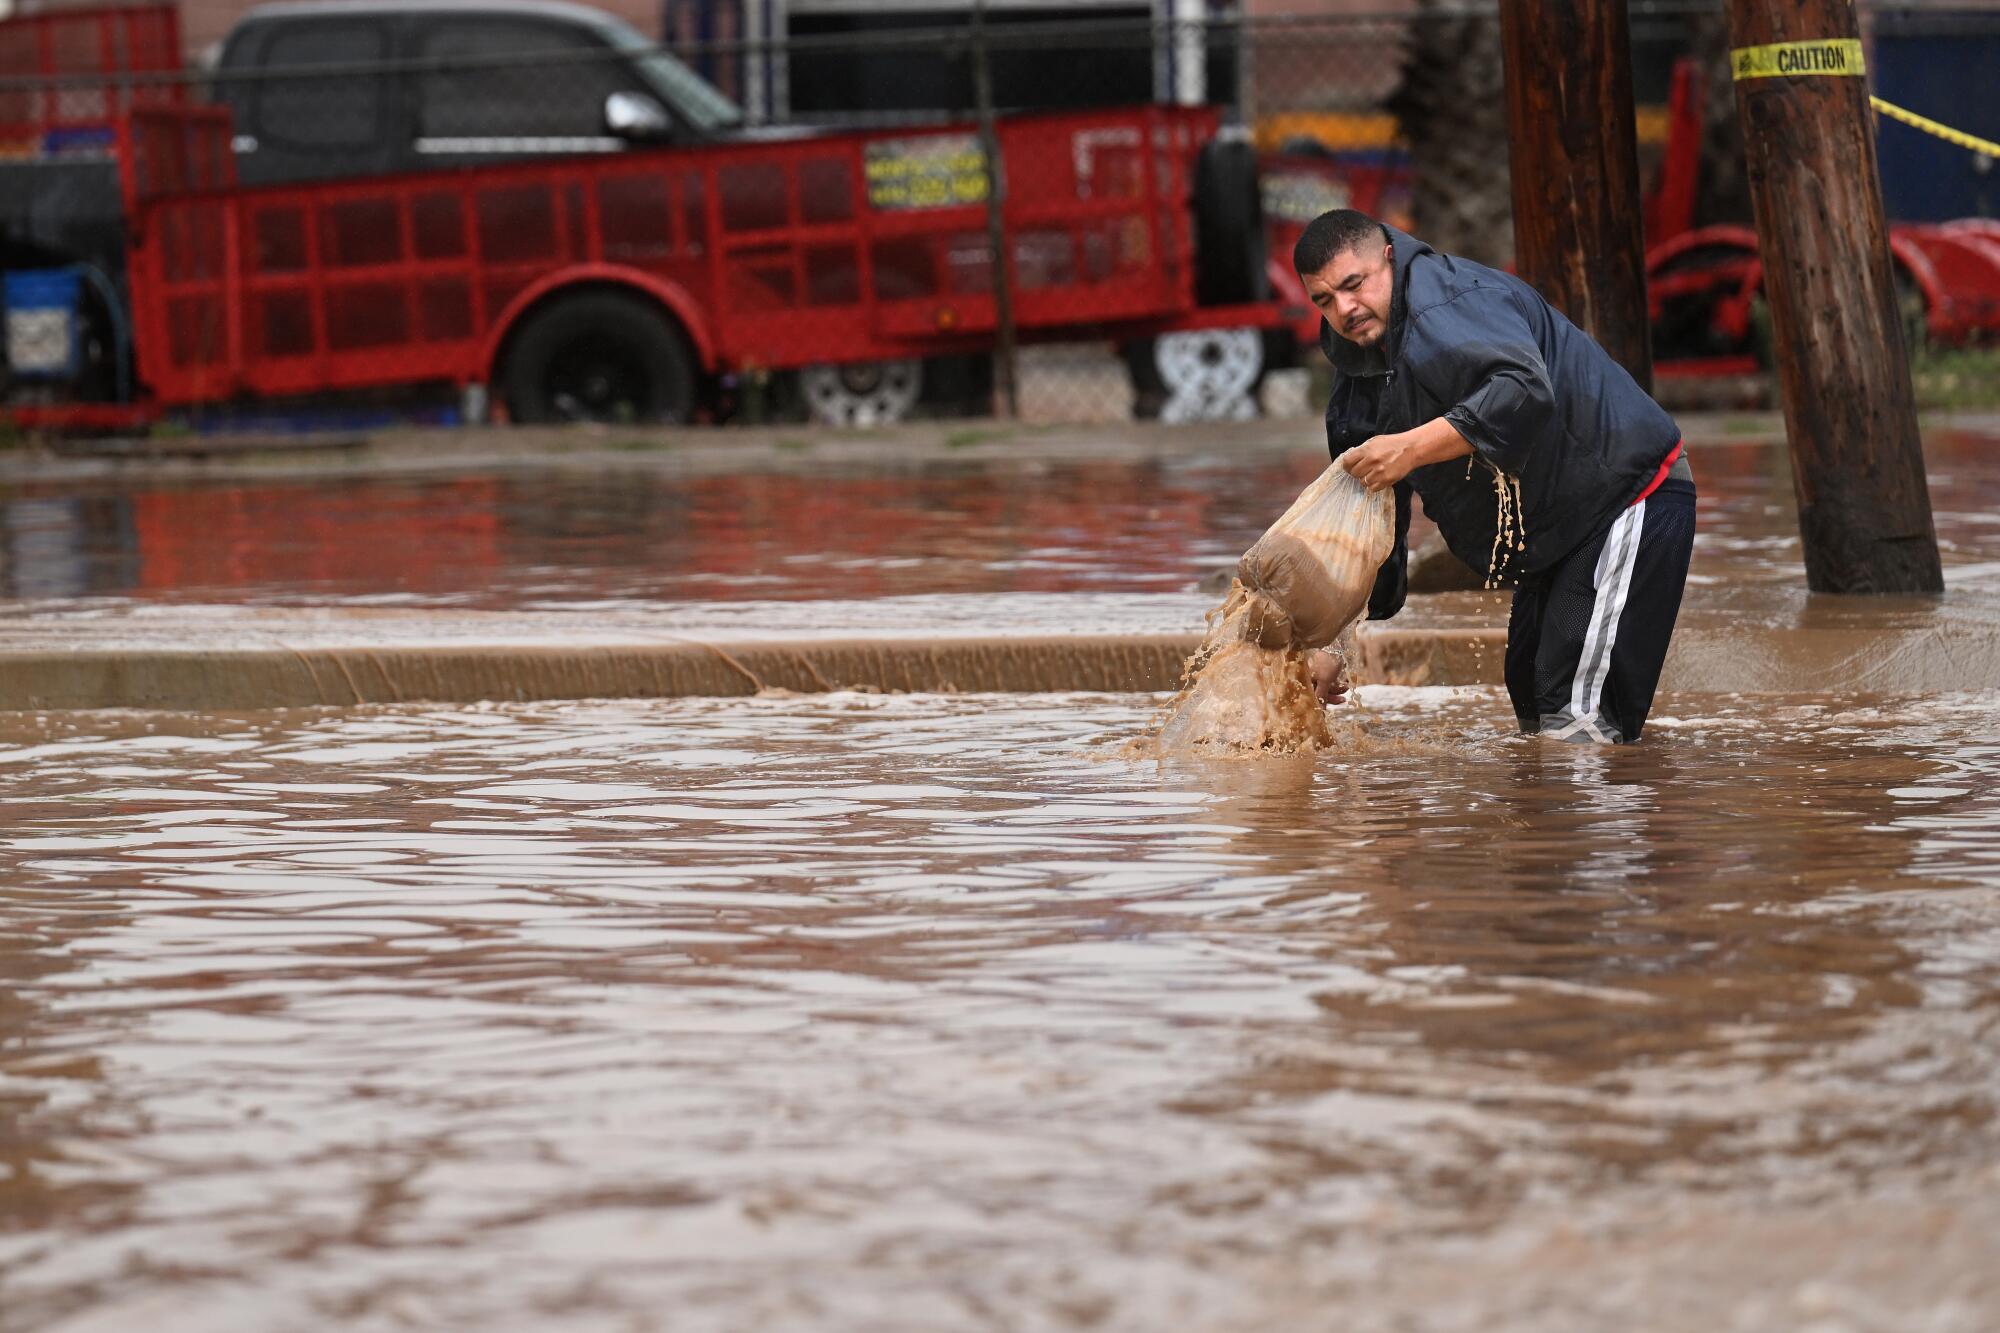 A man stands knee-deep in muddy floodwater as he tries to clear a drain.